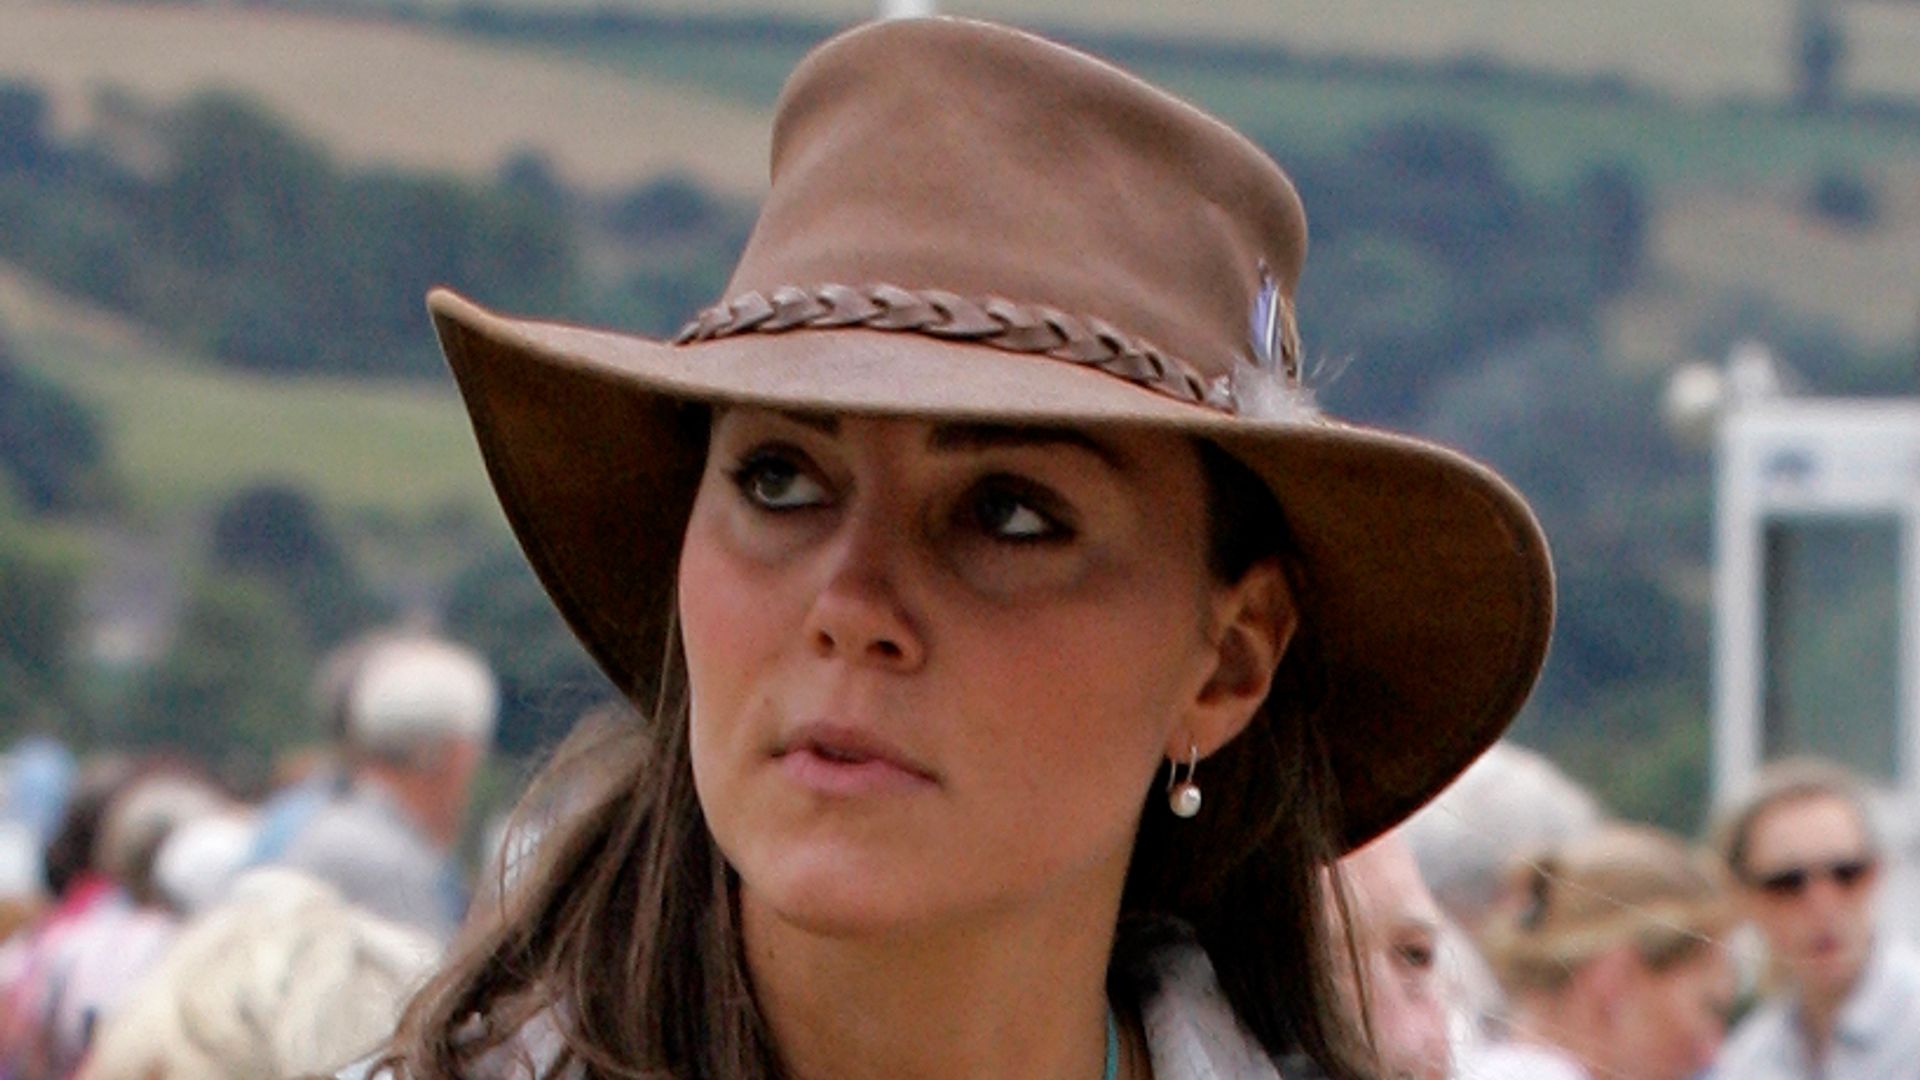 Kate Middleton wearing brown hat and pearl earrings at Festival of British Eventing at Gatcombe Park in 2005 